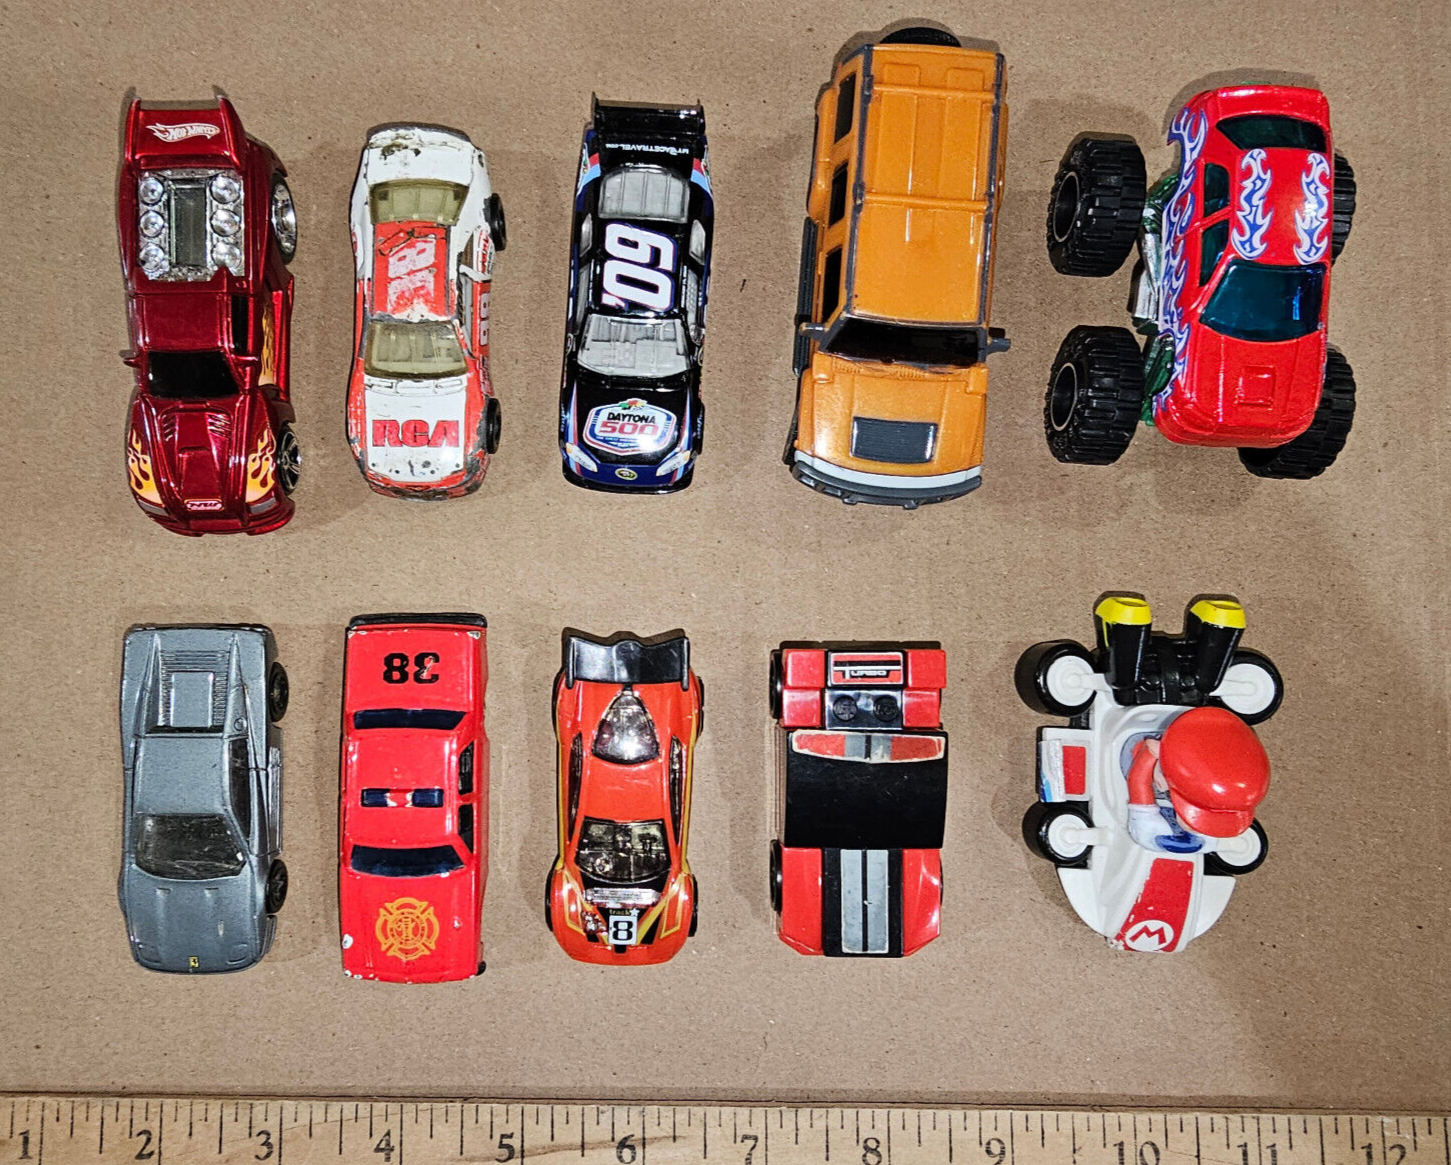 24GG56 LOT OF 10 TOY CARS, HOTWHEELS / MATCHBOX SIZE, GOOD CONDITION - $9.45